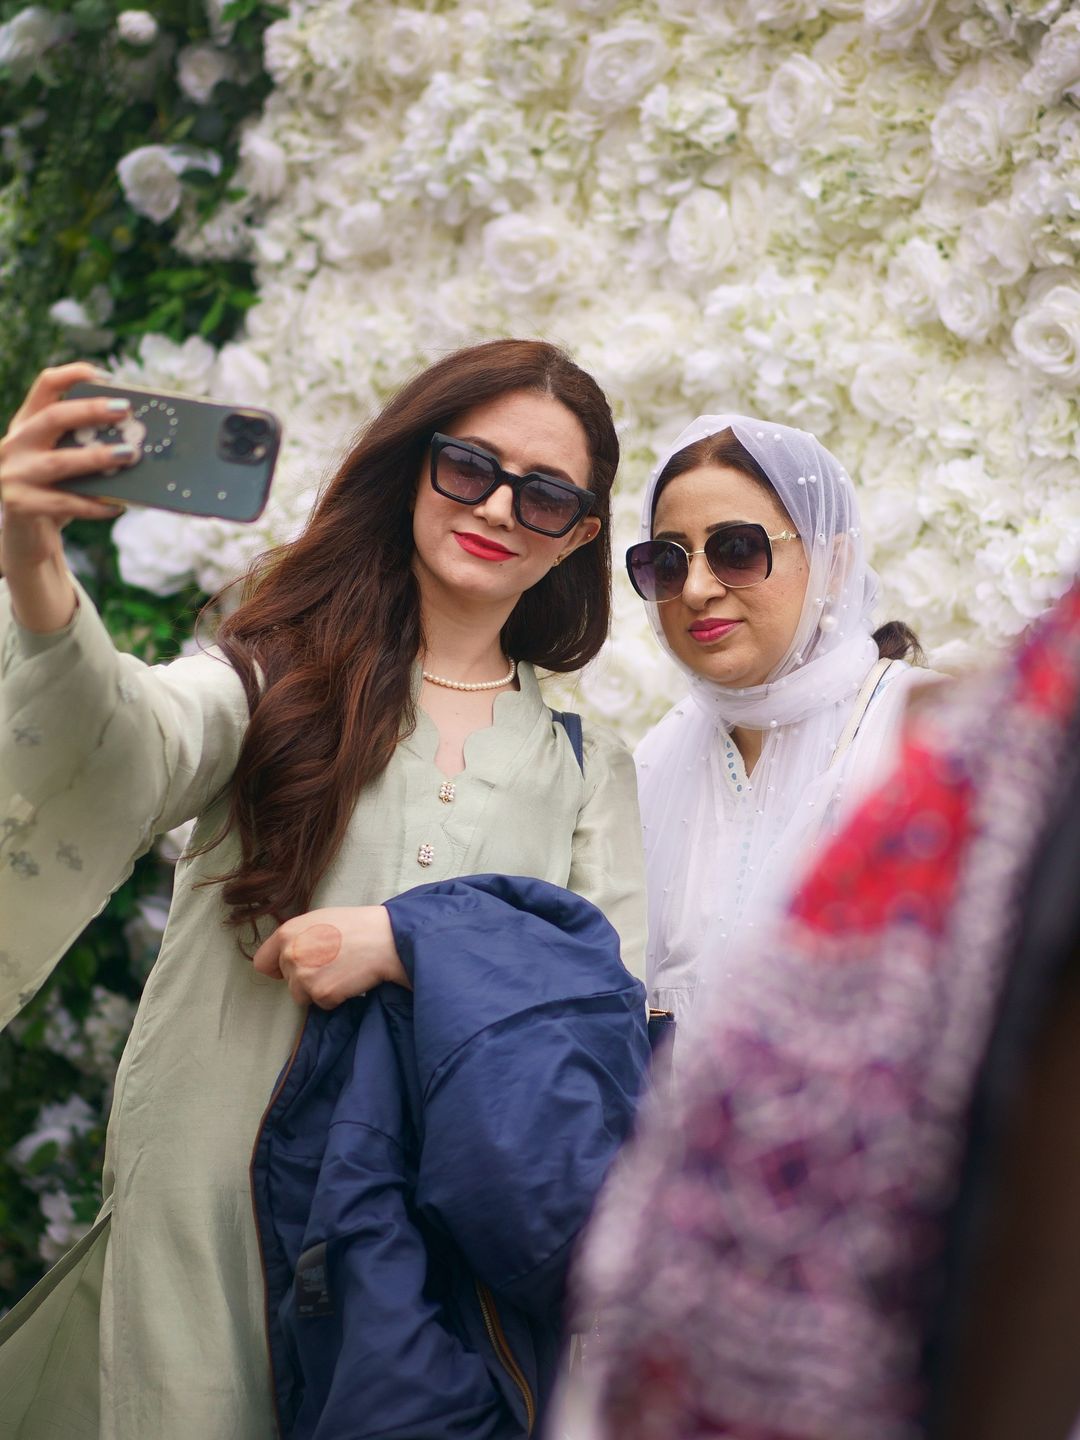 People celebrate during the Eid in the Square festival in Trafalgar Square, London by taking a selfie infront of a floral wall